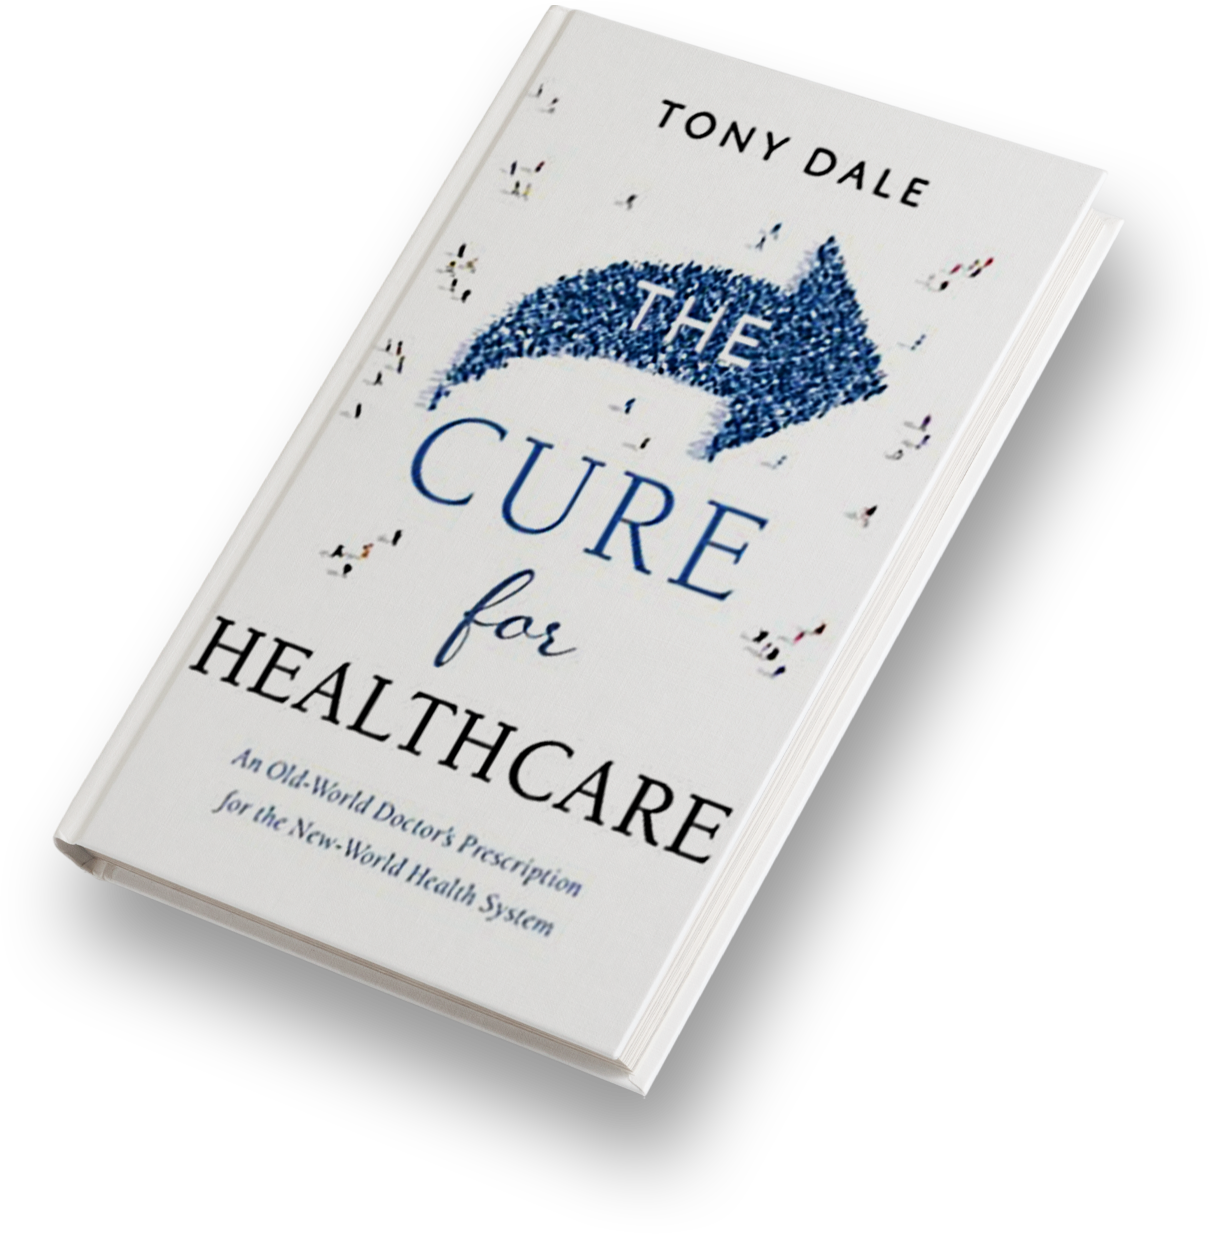 The Cure for Healthcare - by Tony Dale